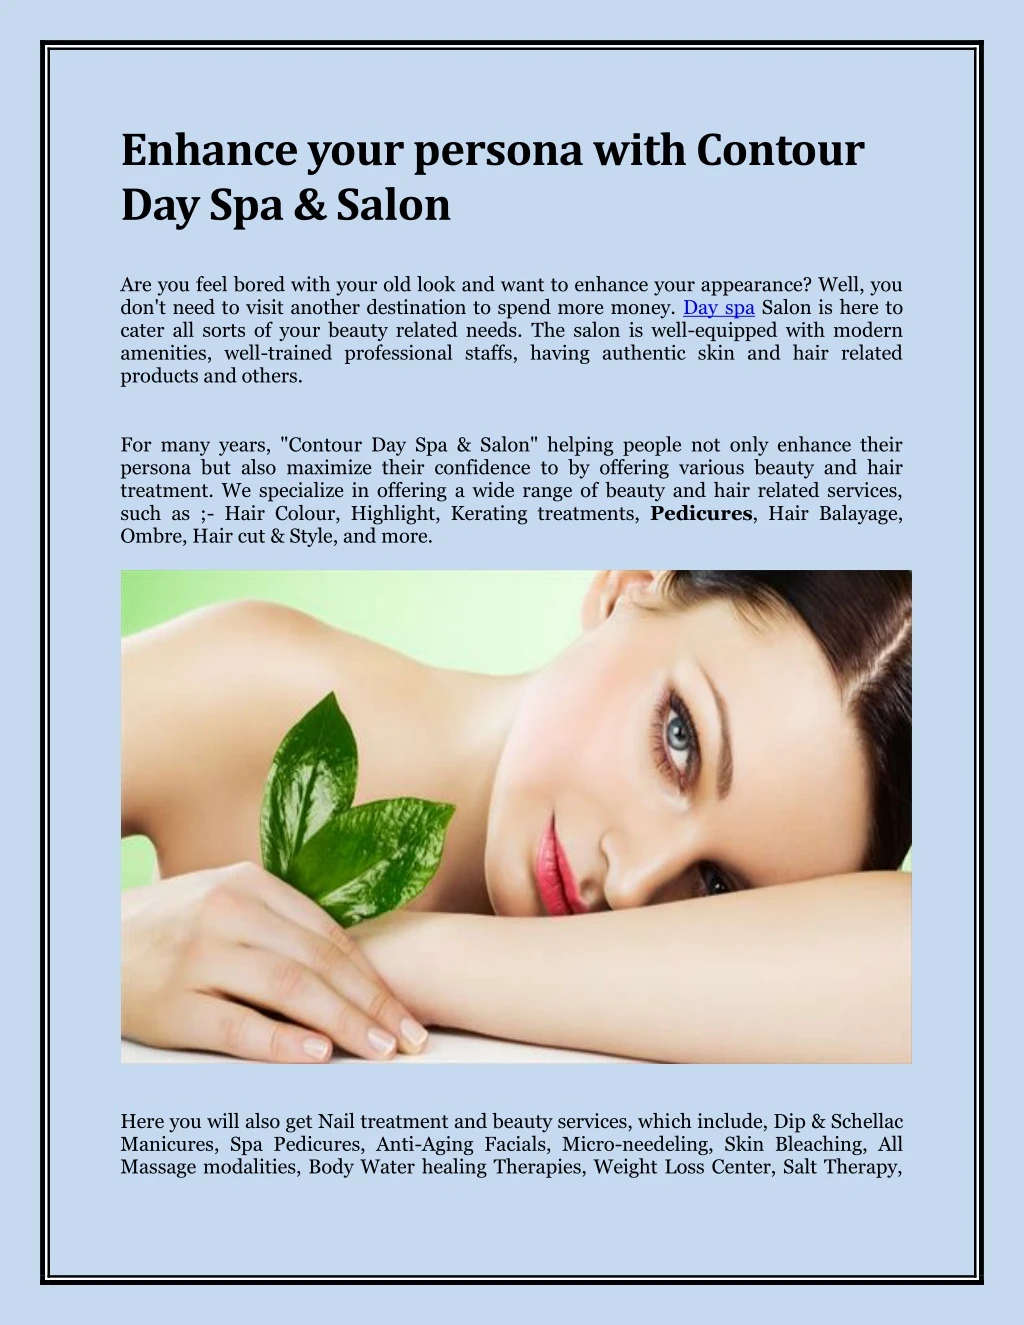 enhance your persona with contour day spa salon